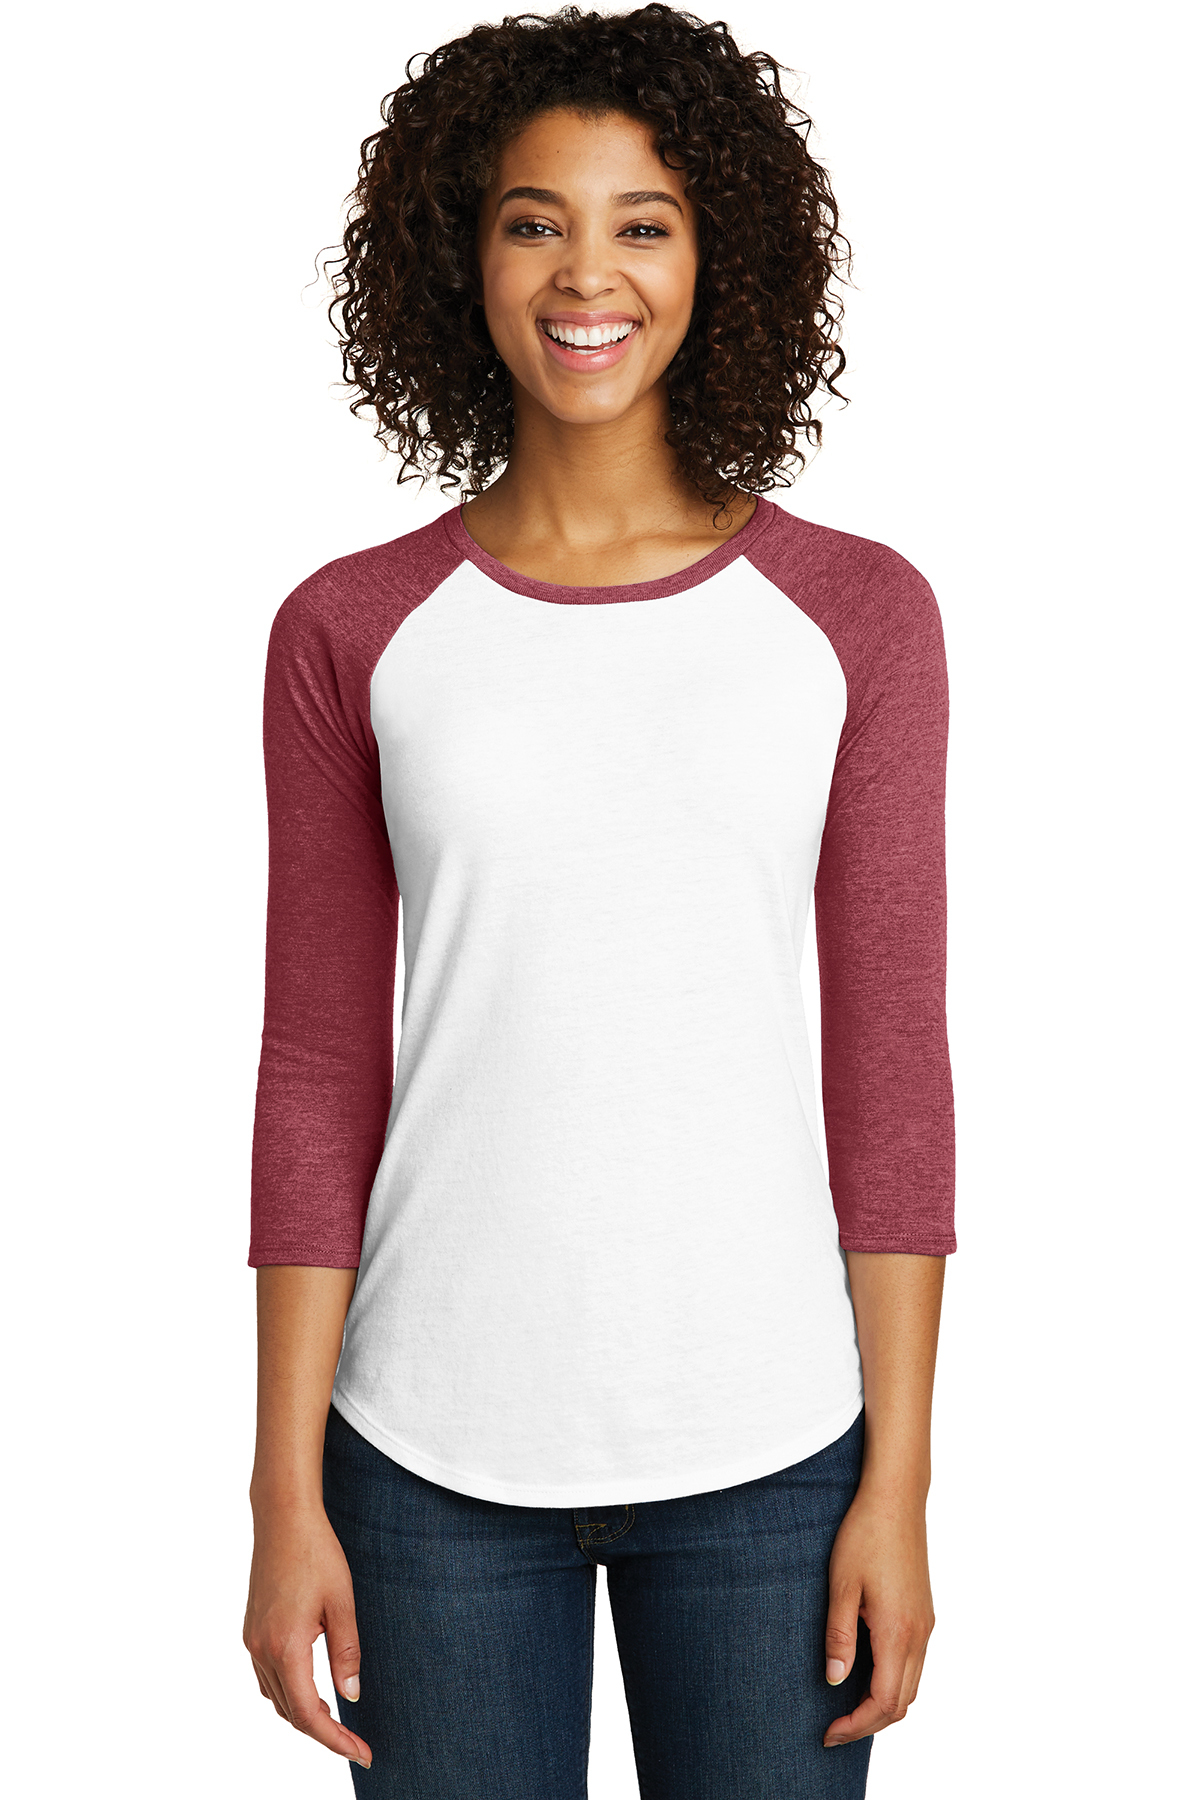 red fitted shirt women's